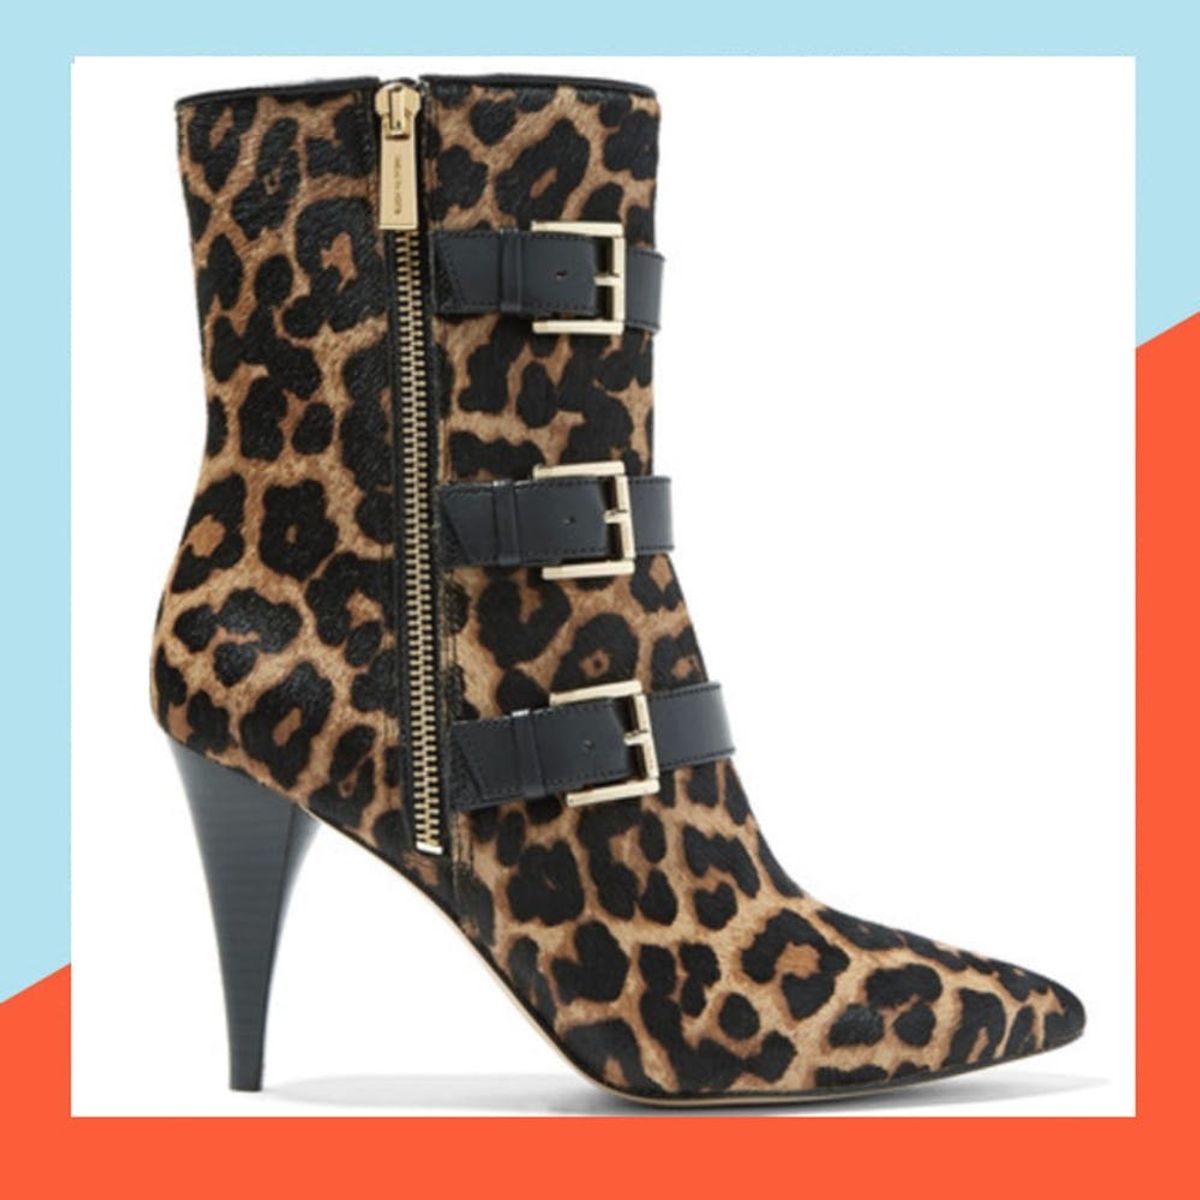 This Embellished Boot Trend Is Worth the Investment - Brit + Co